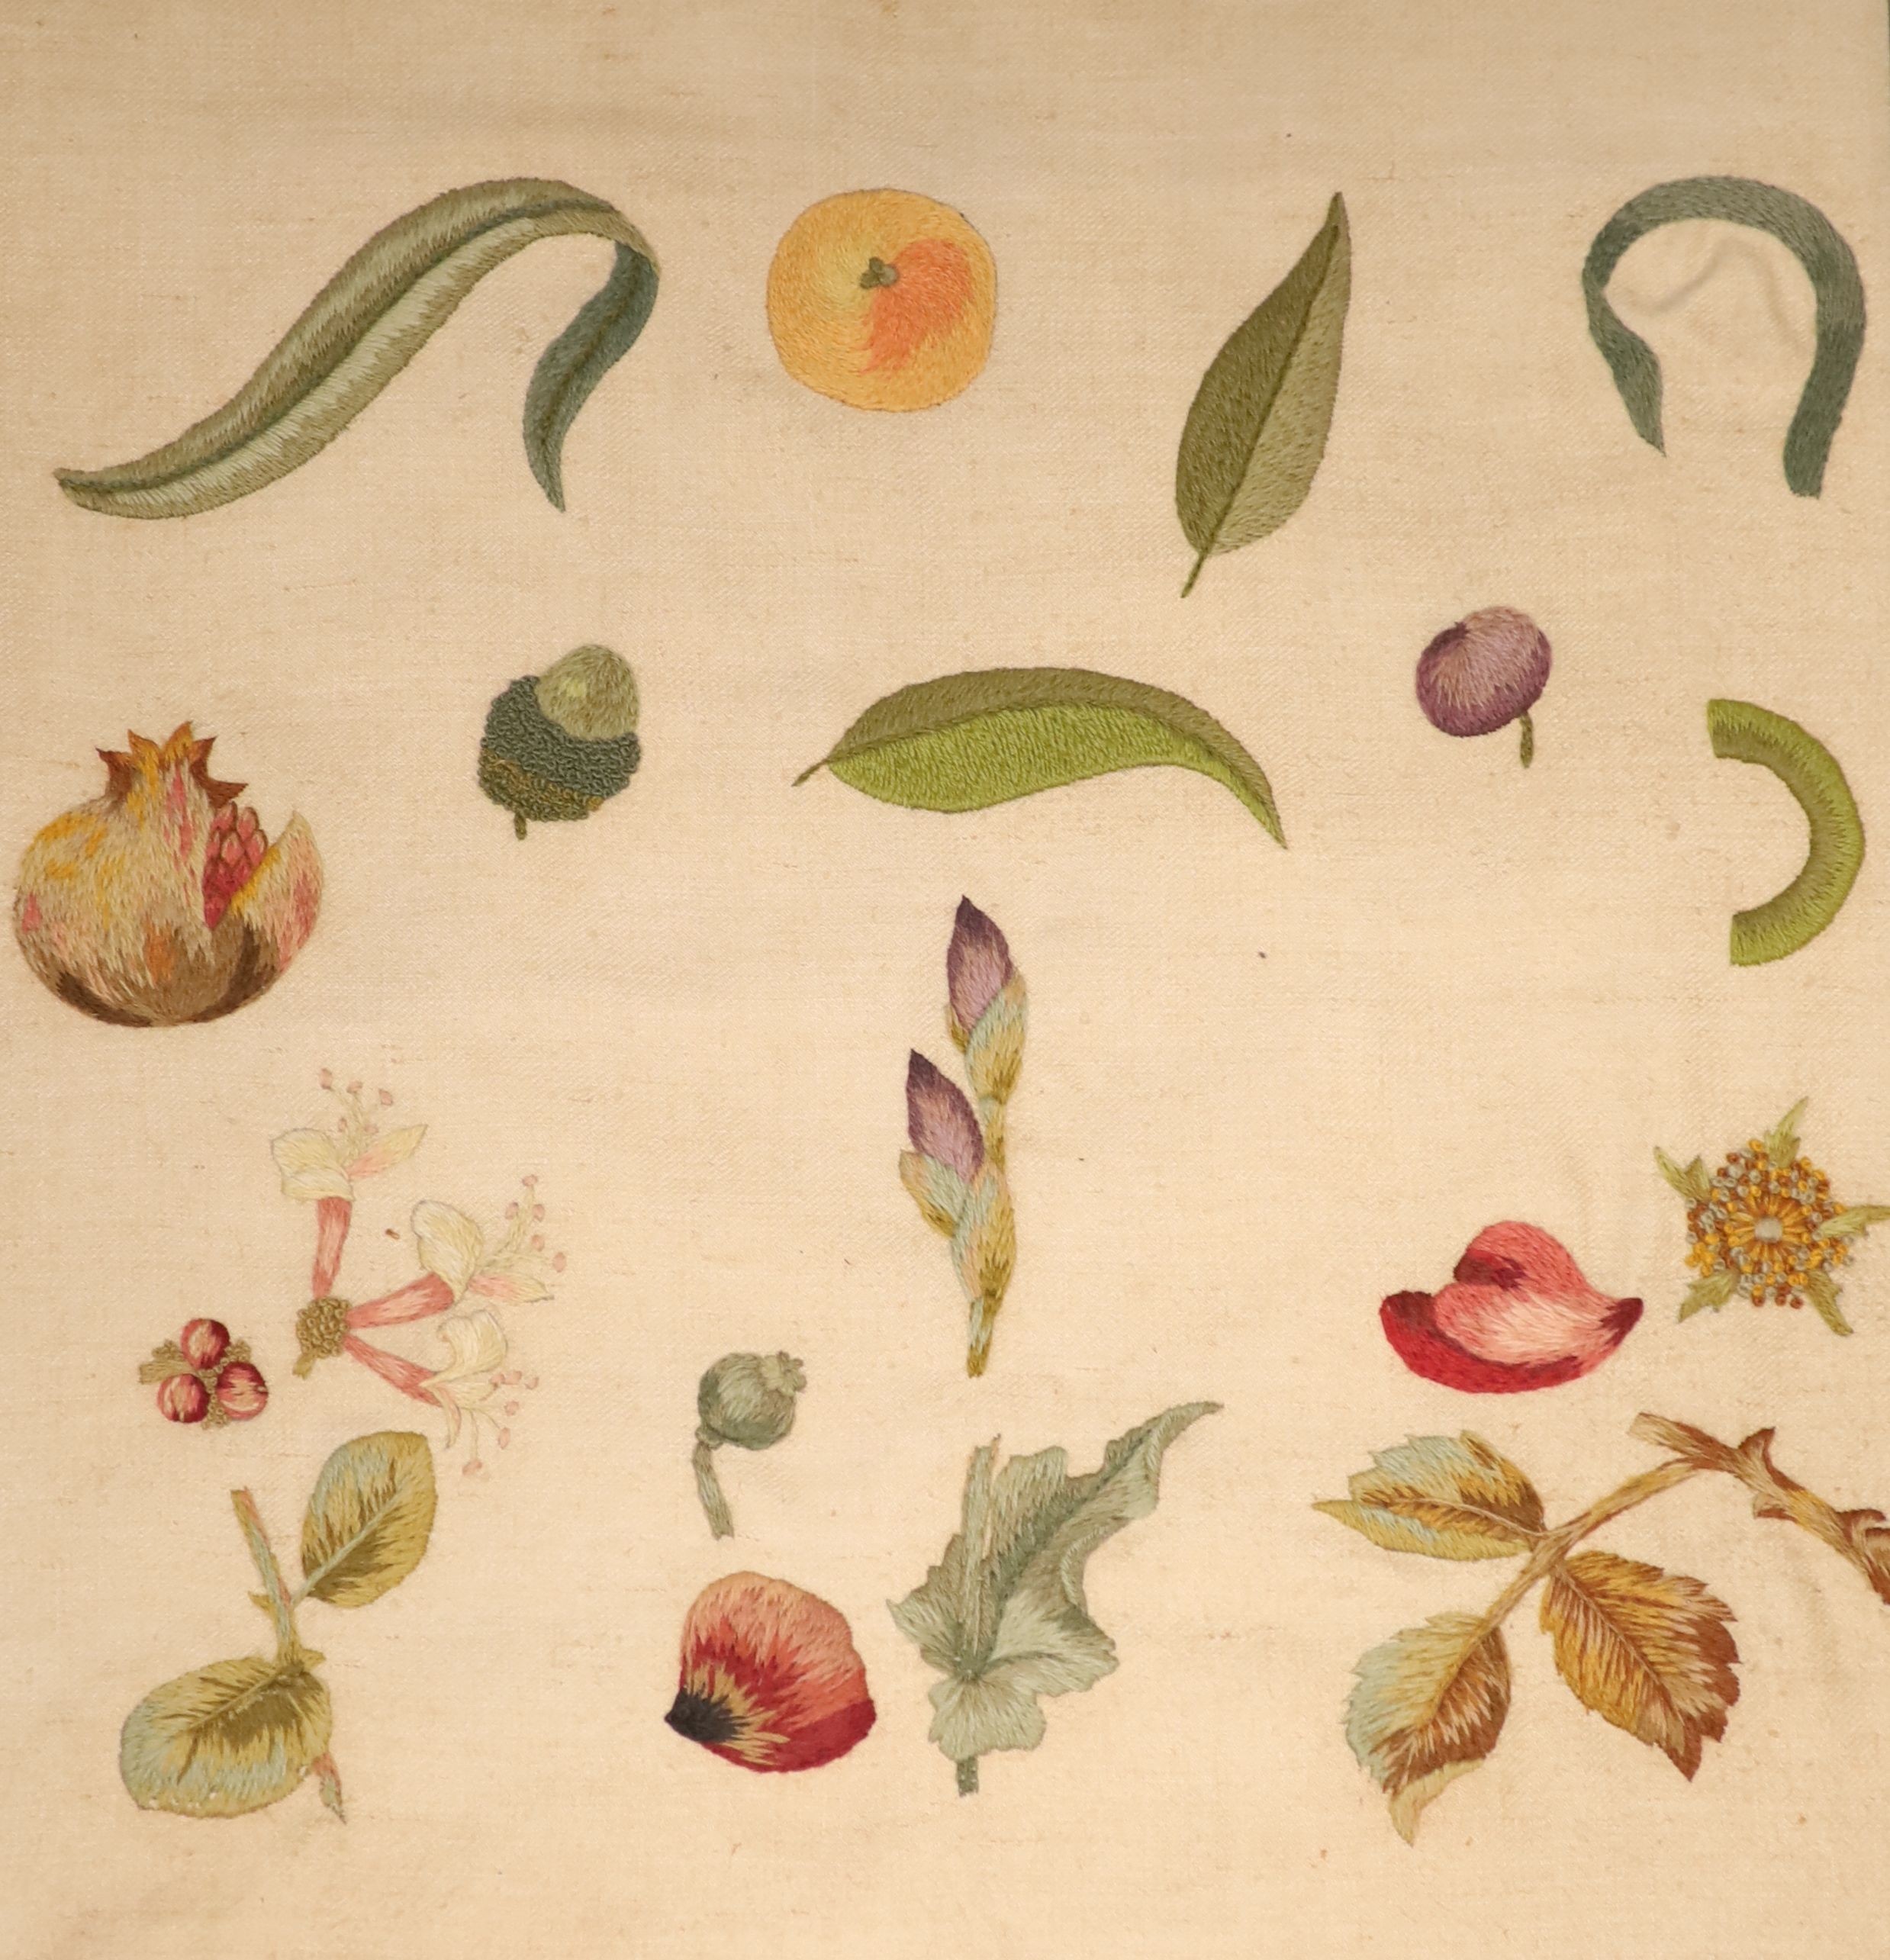 Two crewel work panels, one depicting fruits and flowers, the other quartered with foliage, 50 x 46cm, in simulated mahogany frames, overall 69 x 65cm